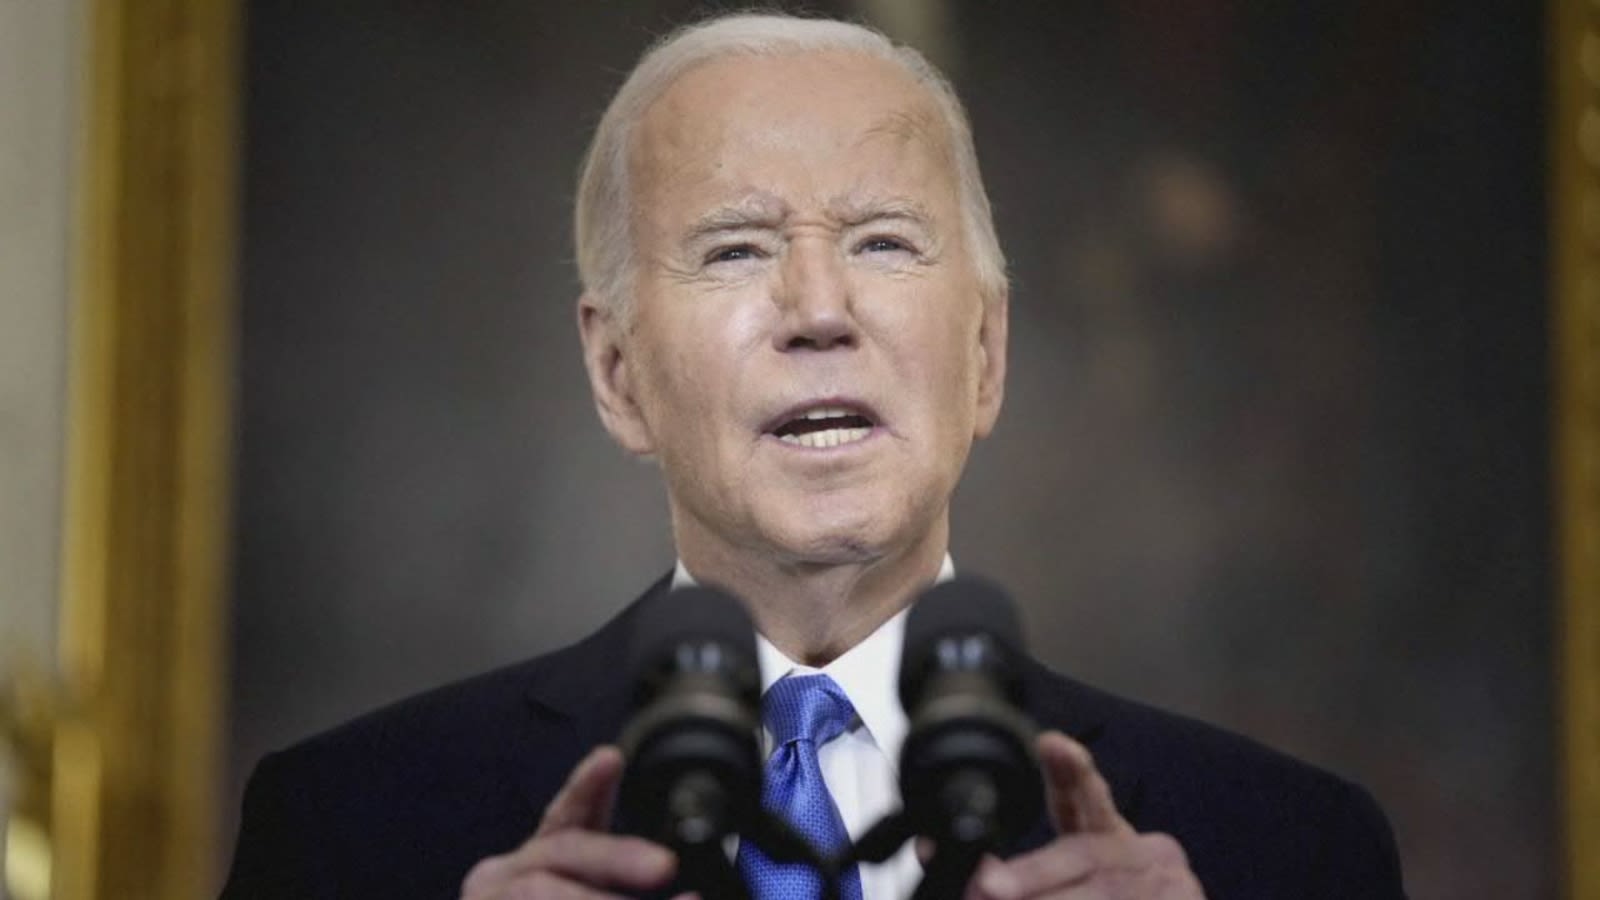 President Joe Biden to sit down with ABC News on Friday for first interview since debate